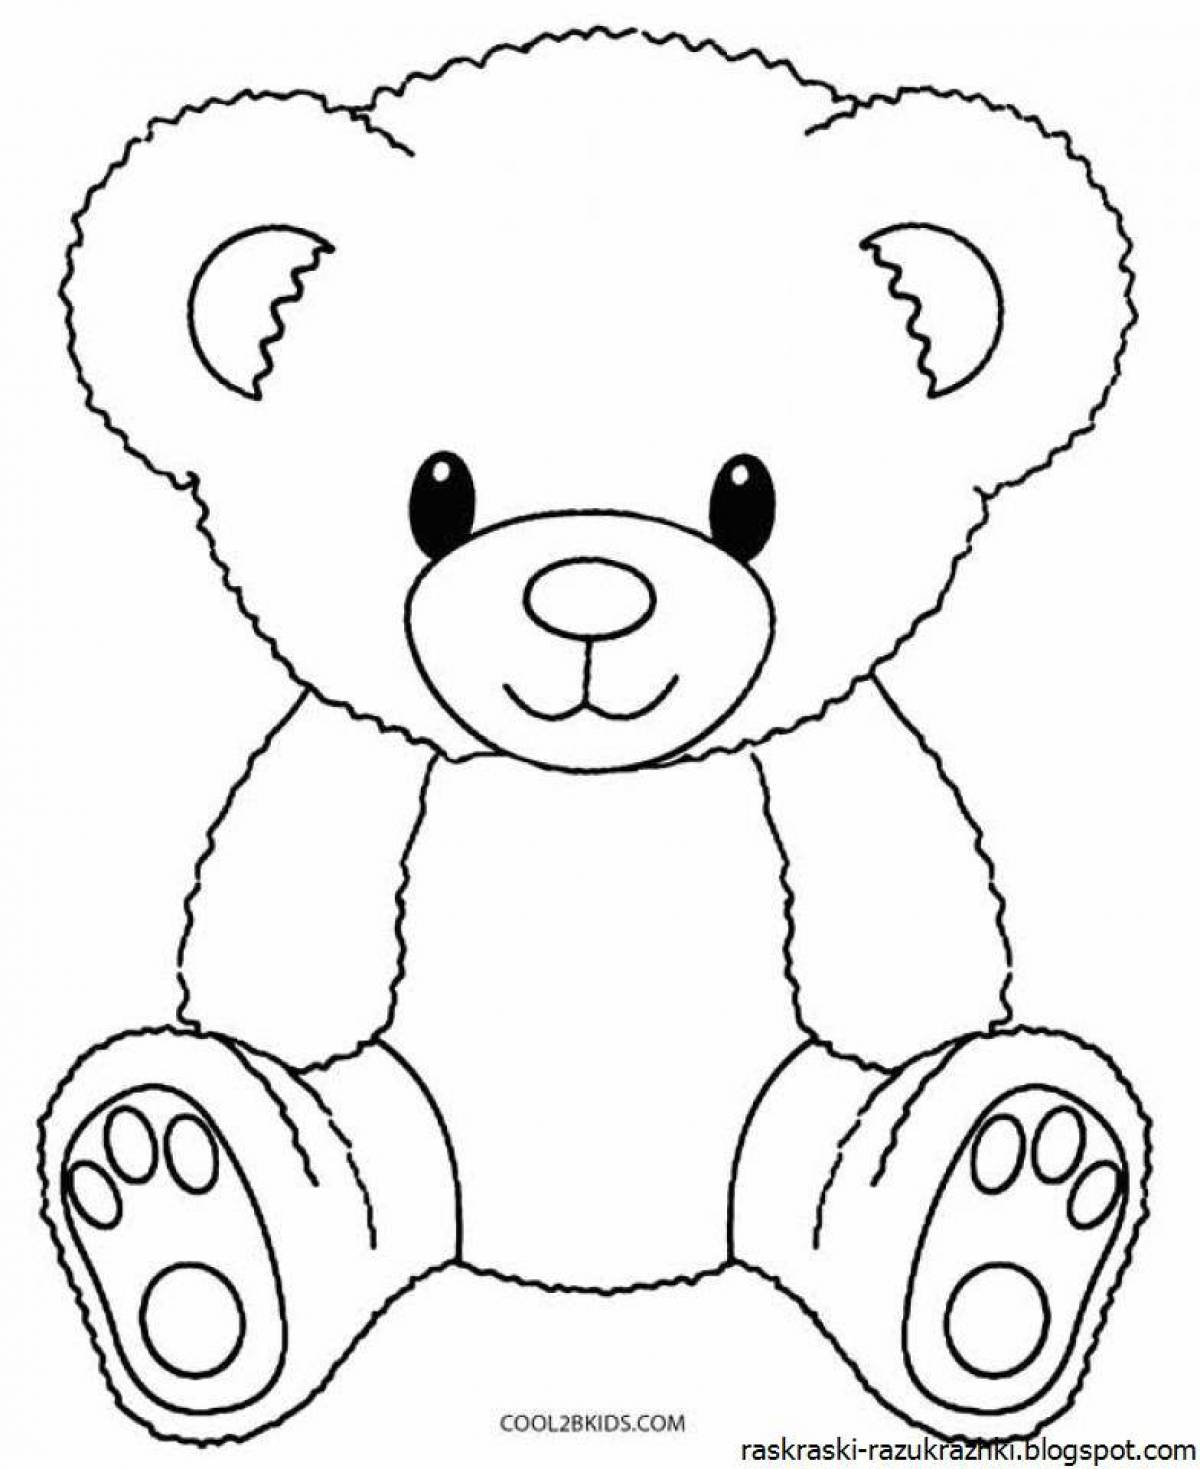 Color explosion coloring pages